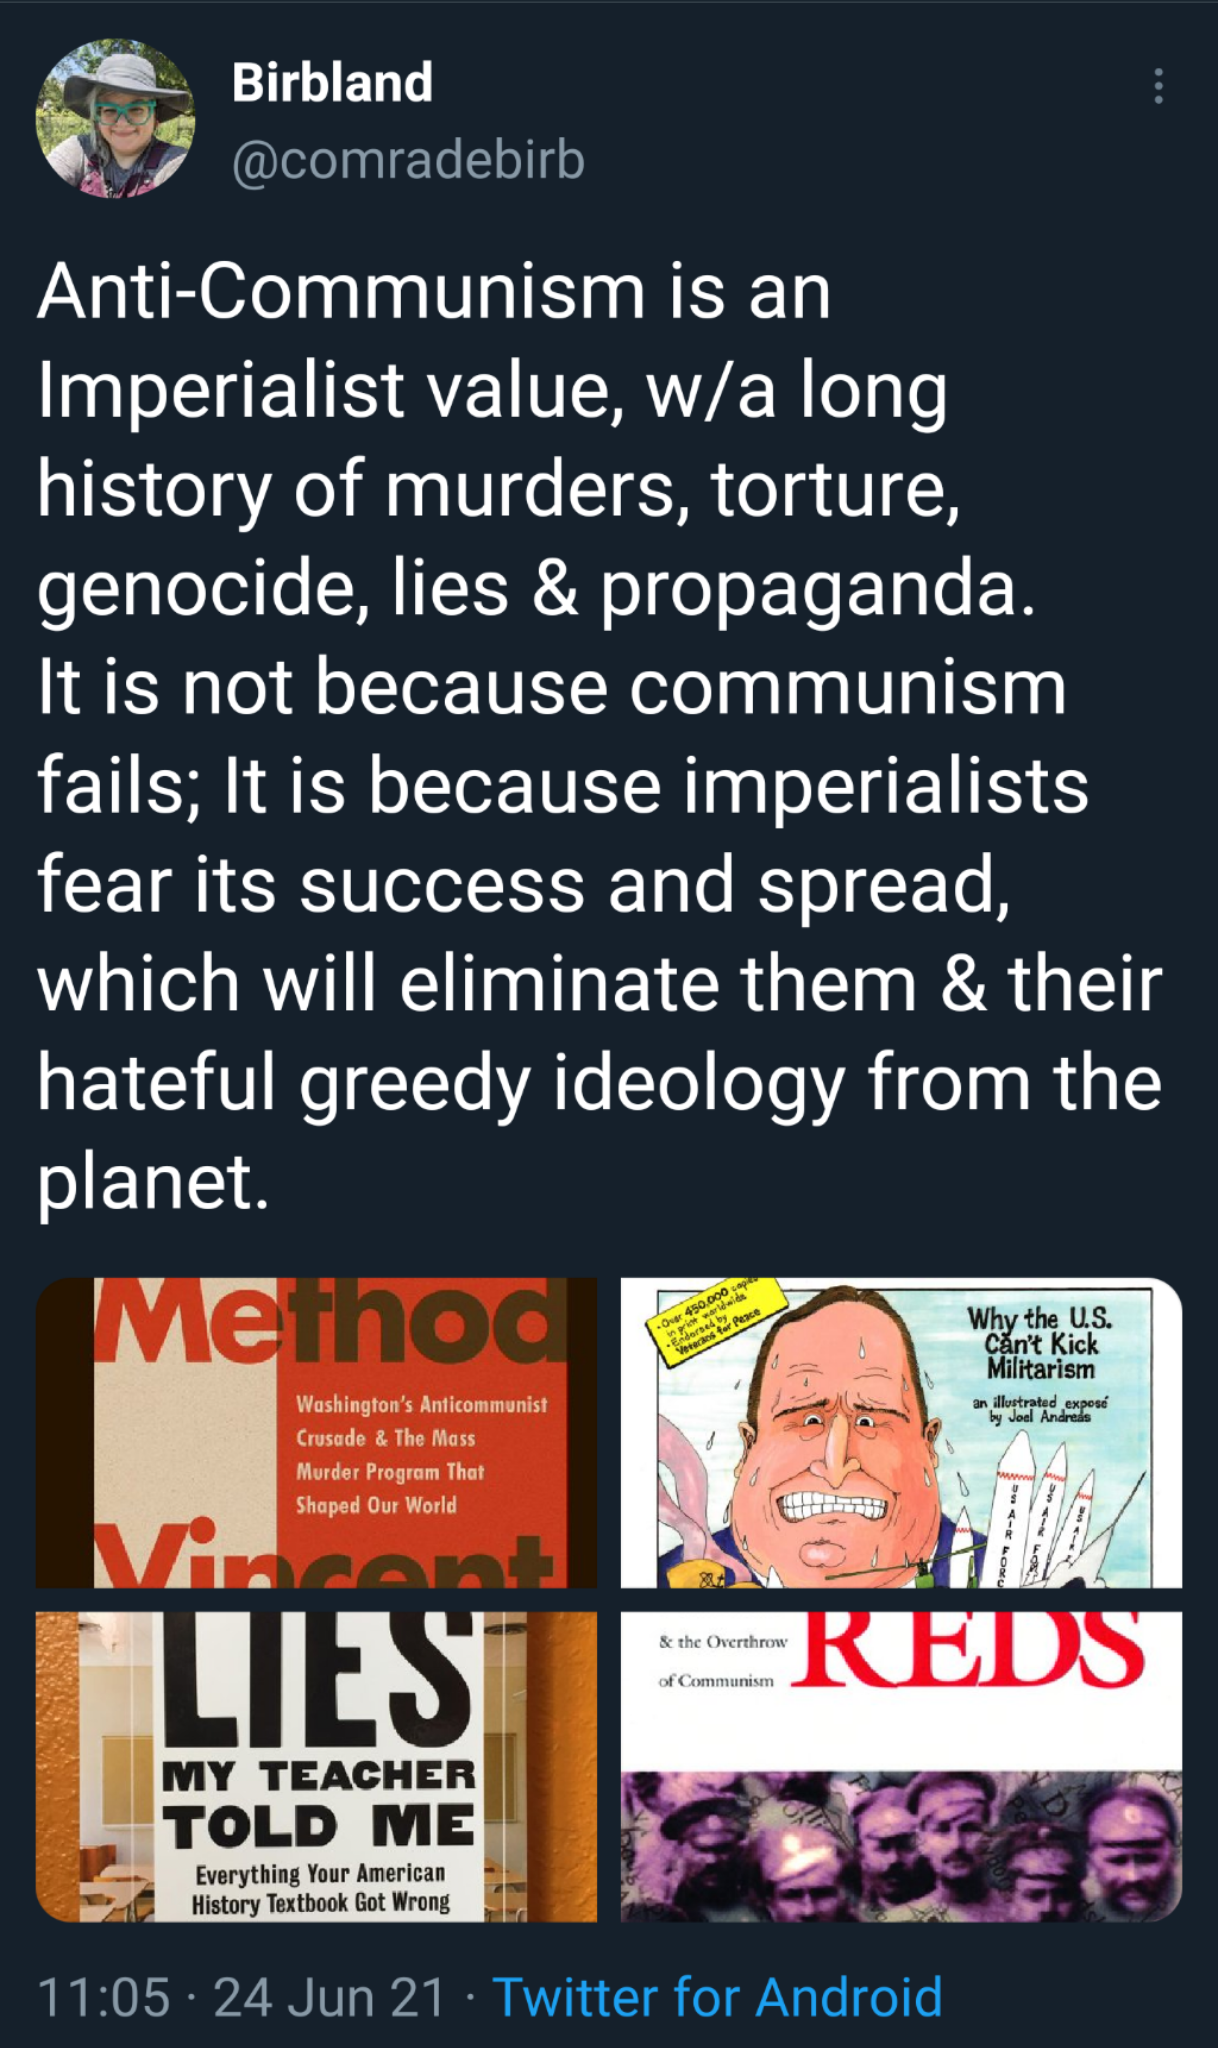 Anti-Communism is an Imperialist Value & Tool